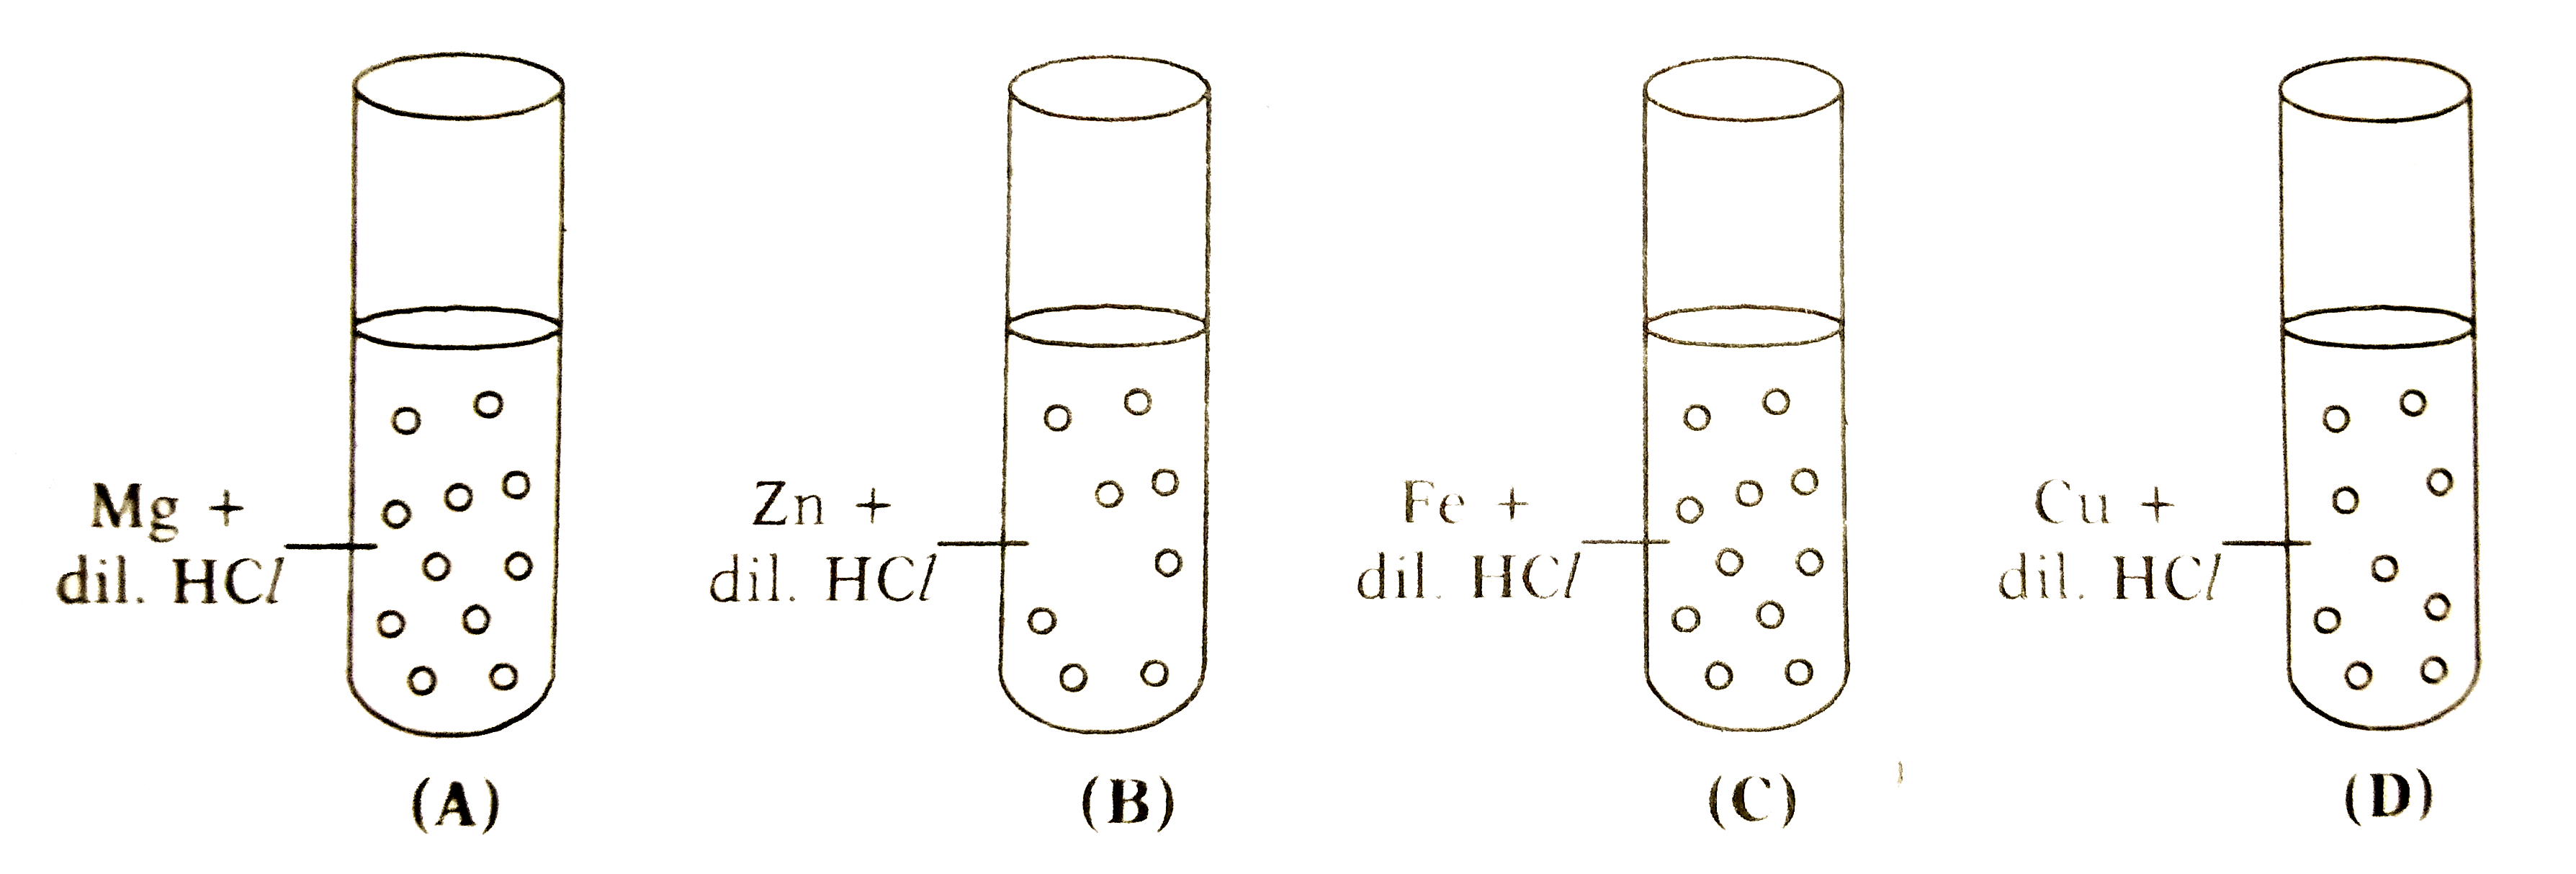 In  the below mentioned diagram four test-tubes A, B, C and D contains dil . HCl. Defferent metal granules are put inside the dil.HCI. In which test-tube the reaction is more vigorous at room temperature ?